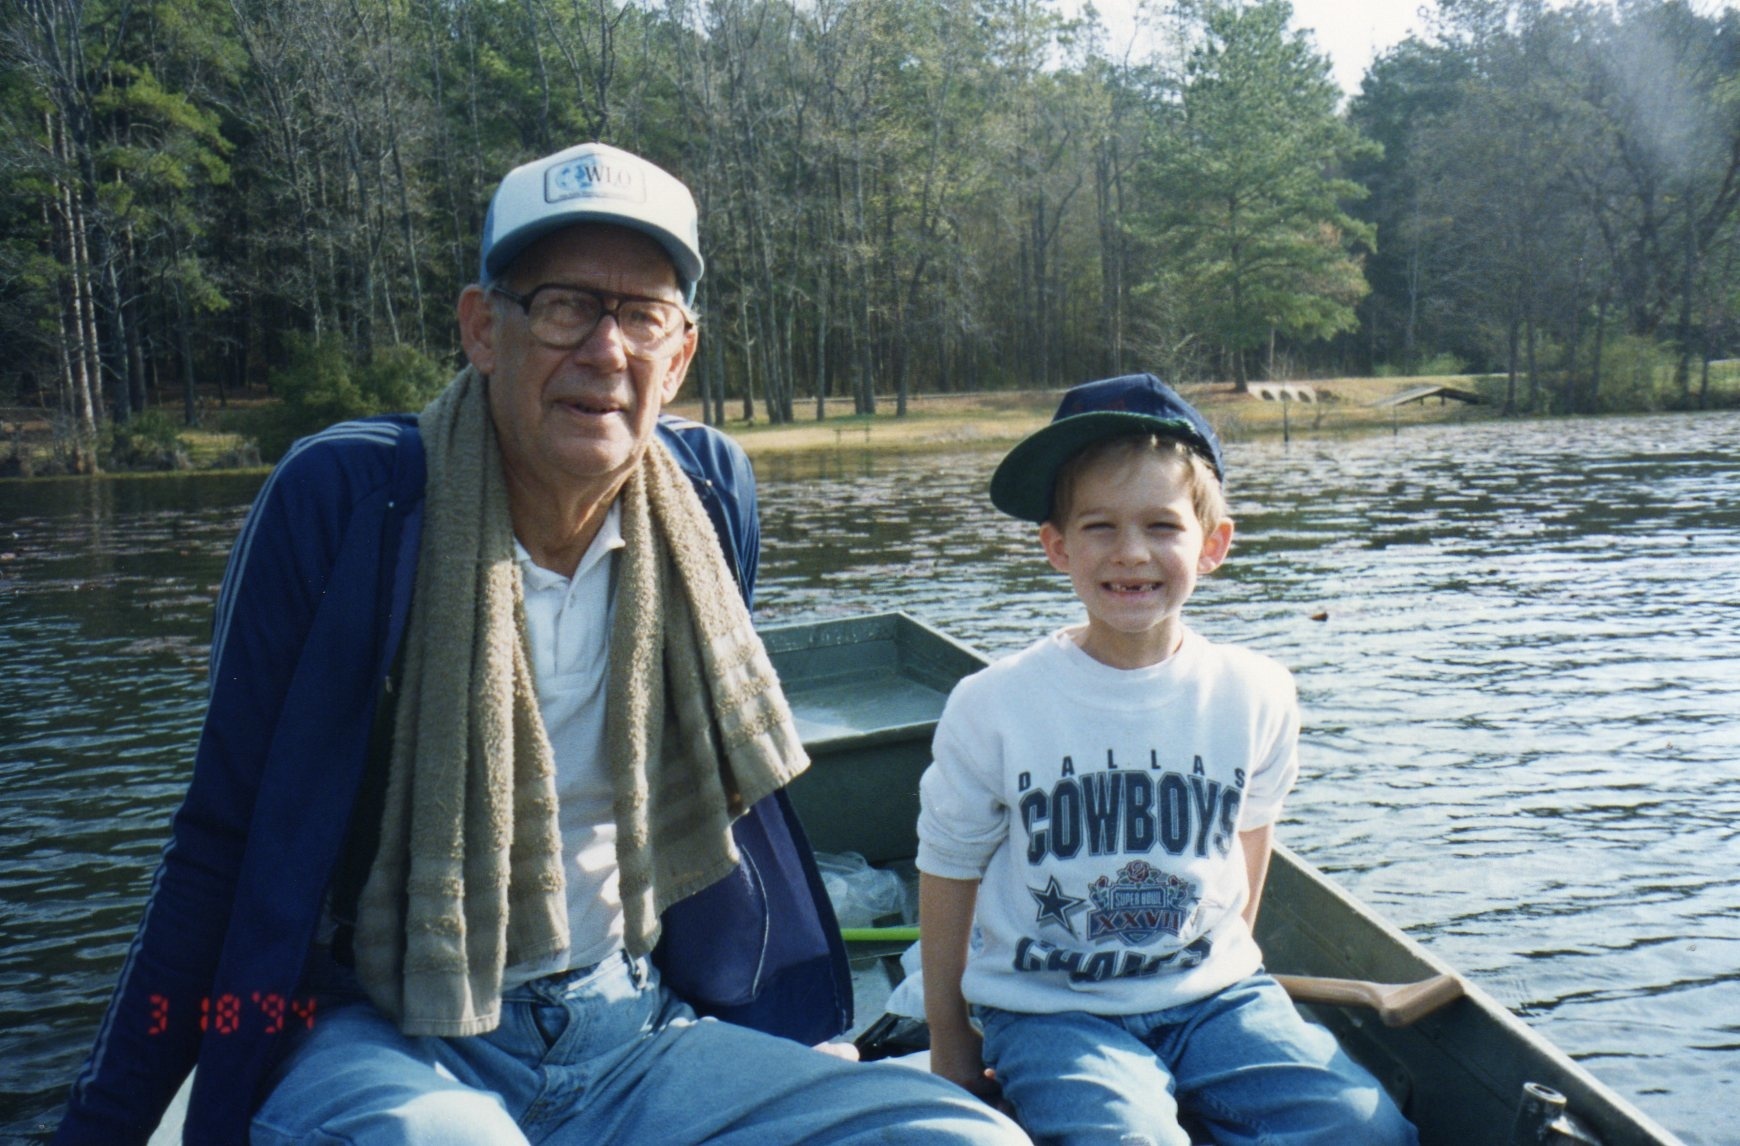 My dad fishing at Daingerfield State Park with Marshall